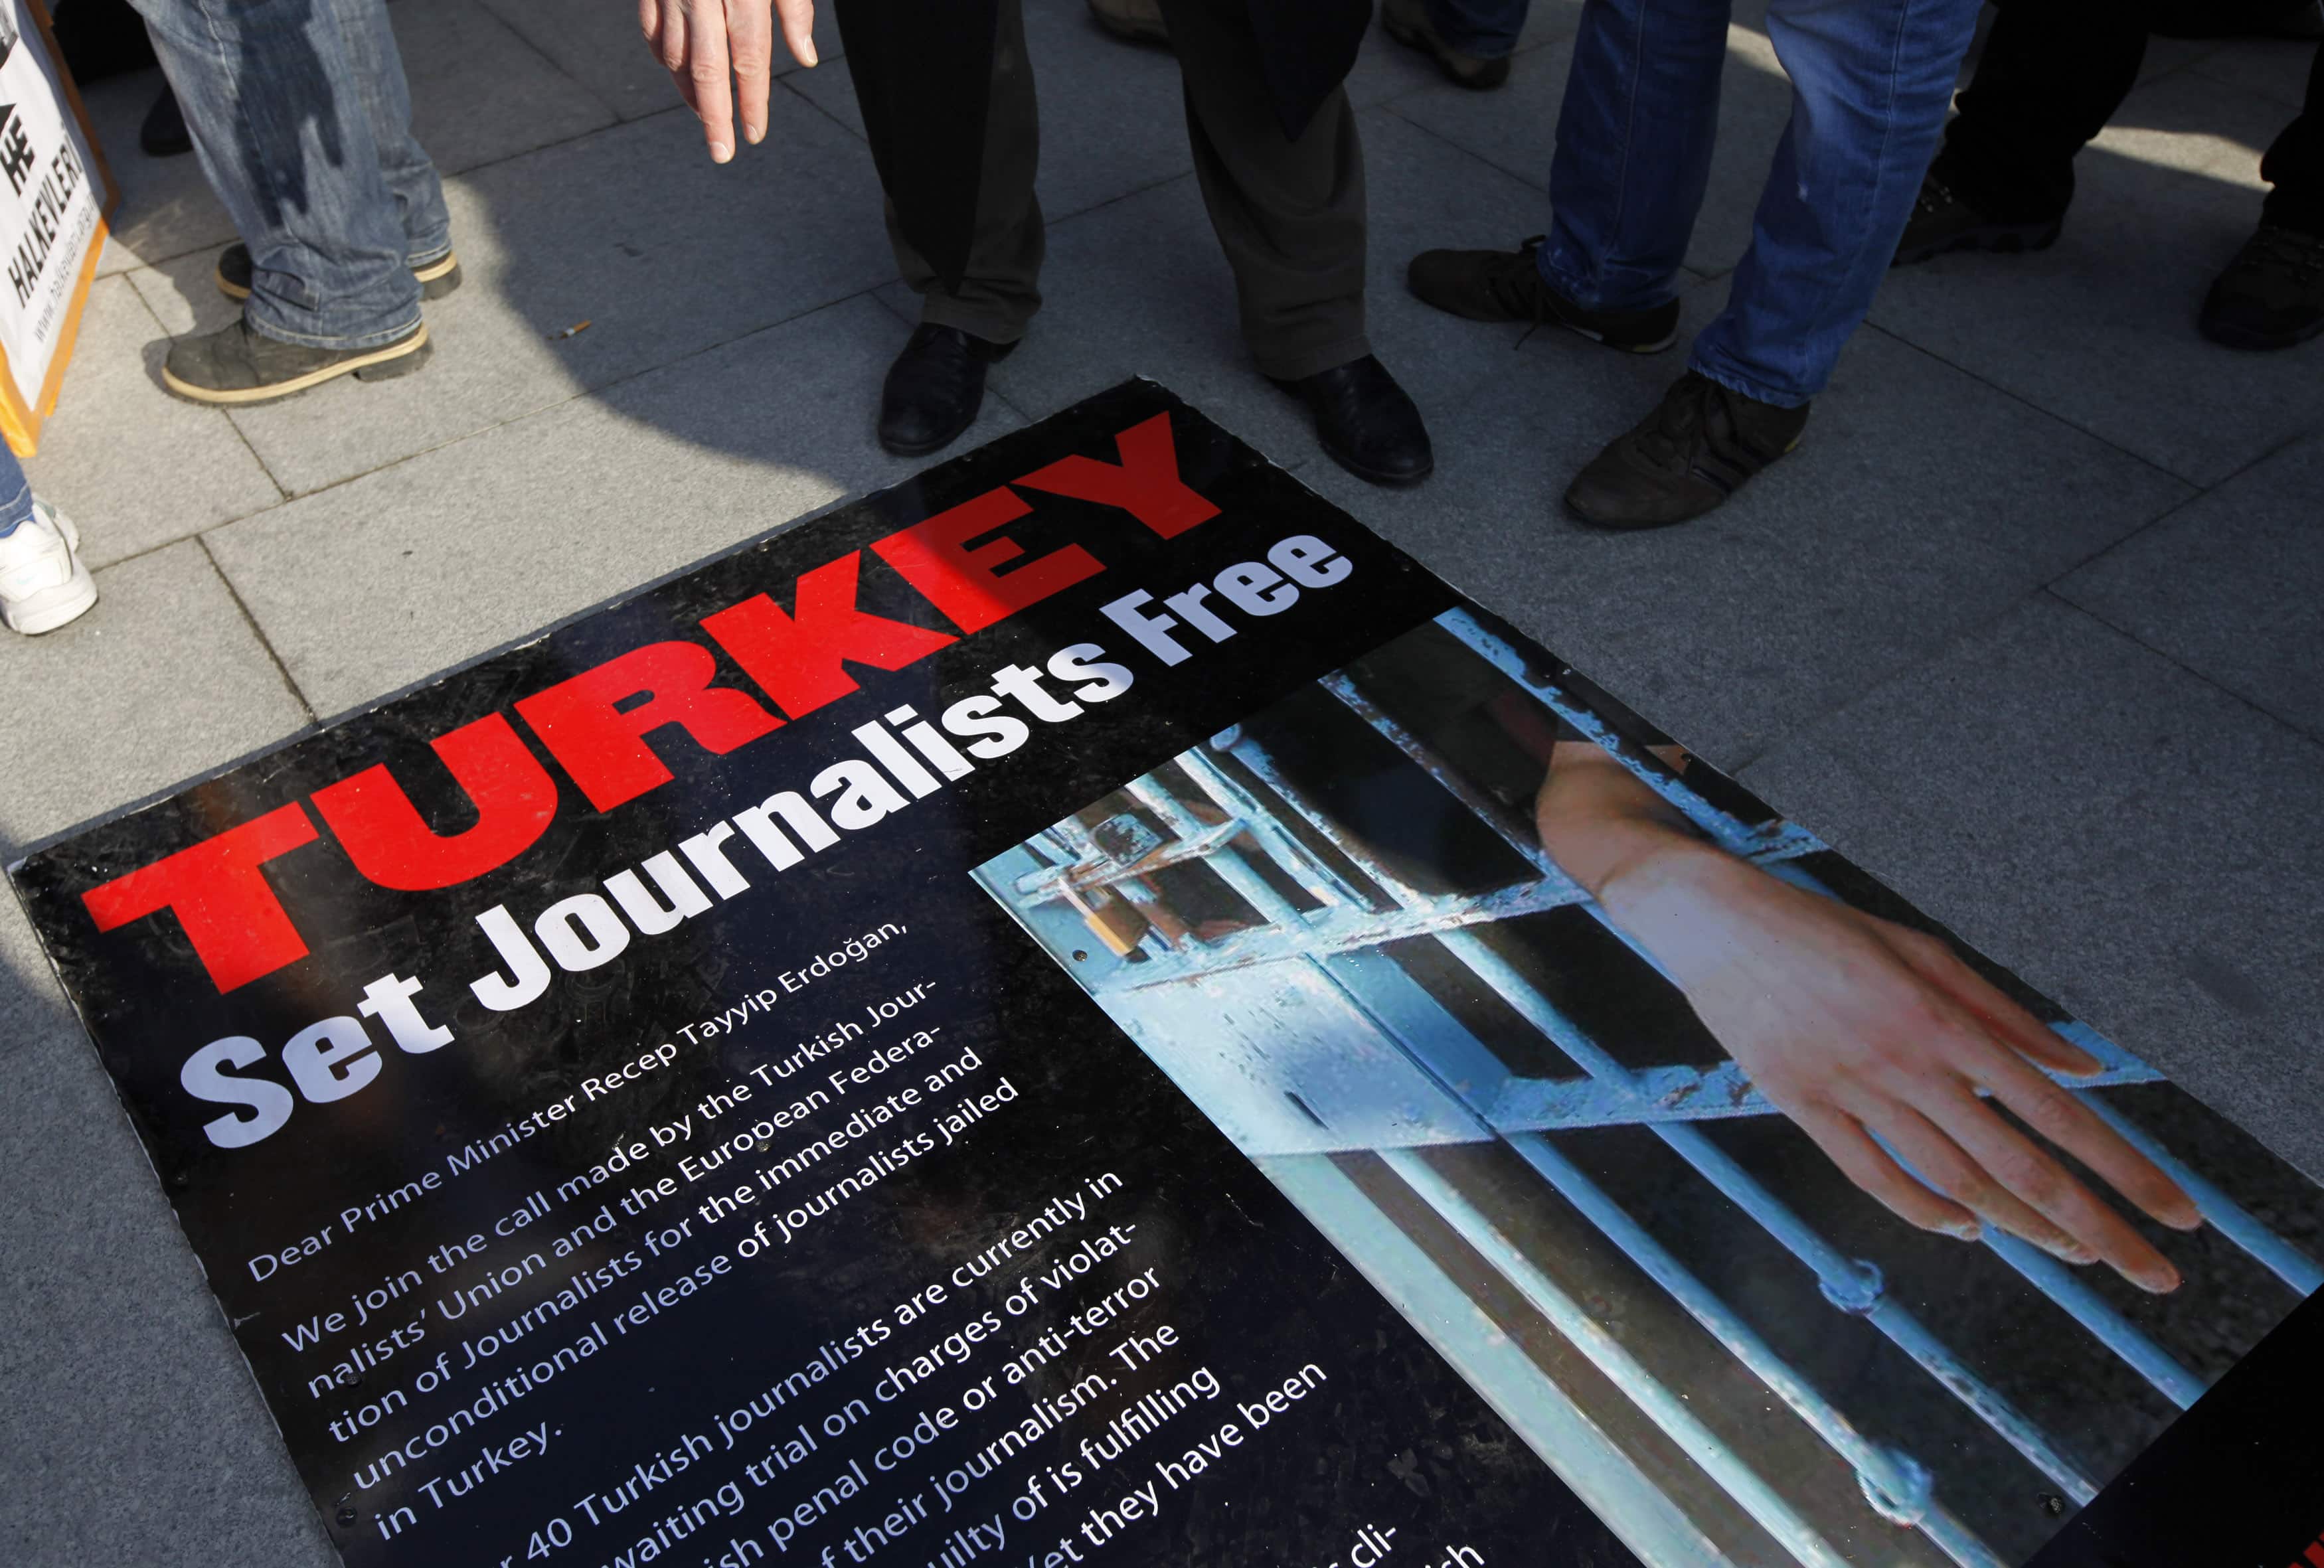 In December 2011, people gathered outside the Justice Palace in Istanbul to protest the detention of journalists; CPJ reports that at least 49 journalists remain jailed in Turkey at the end of 2012, Murad Sezer / Reuters